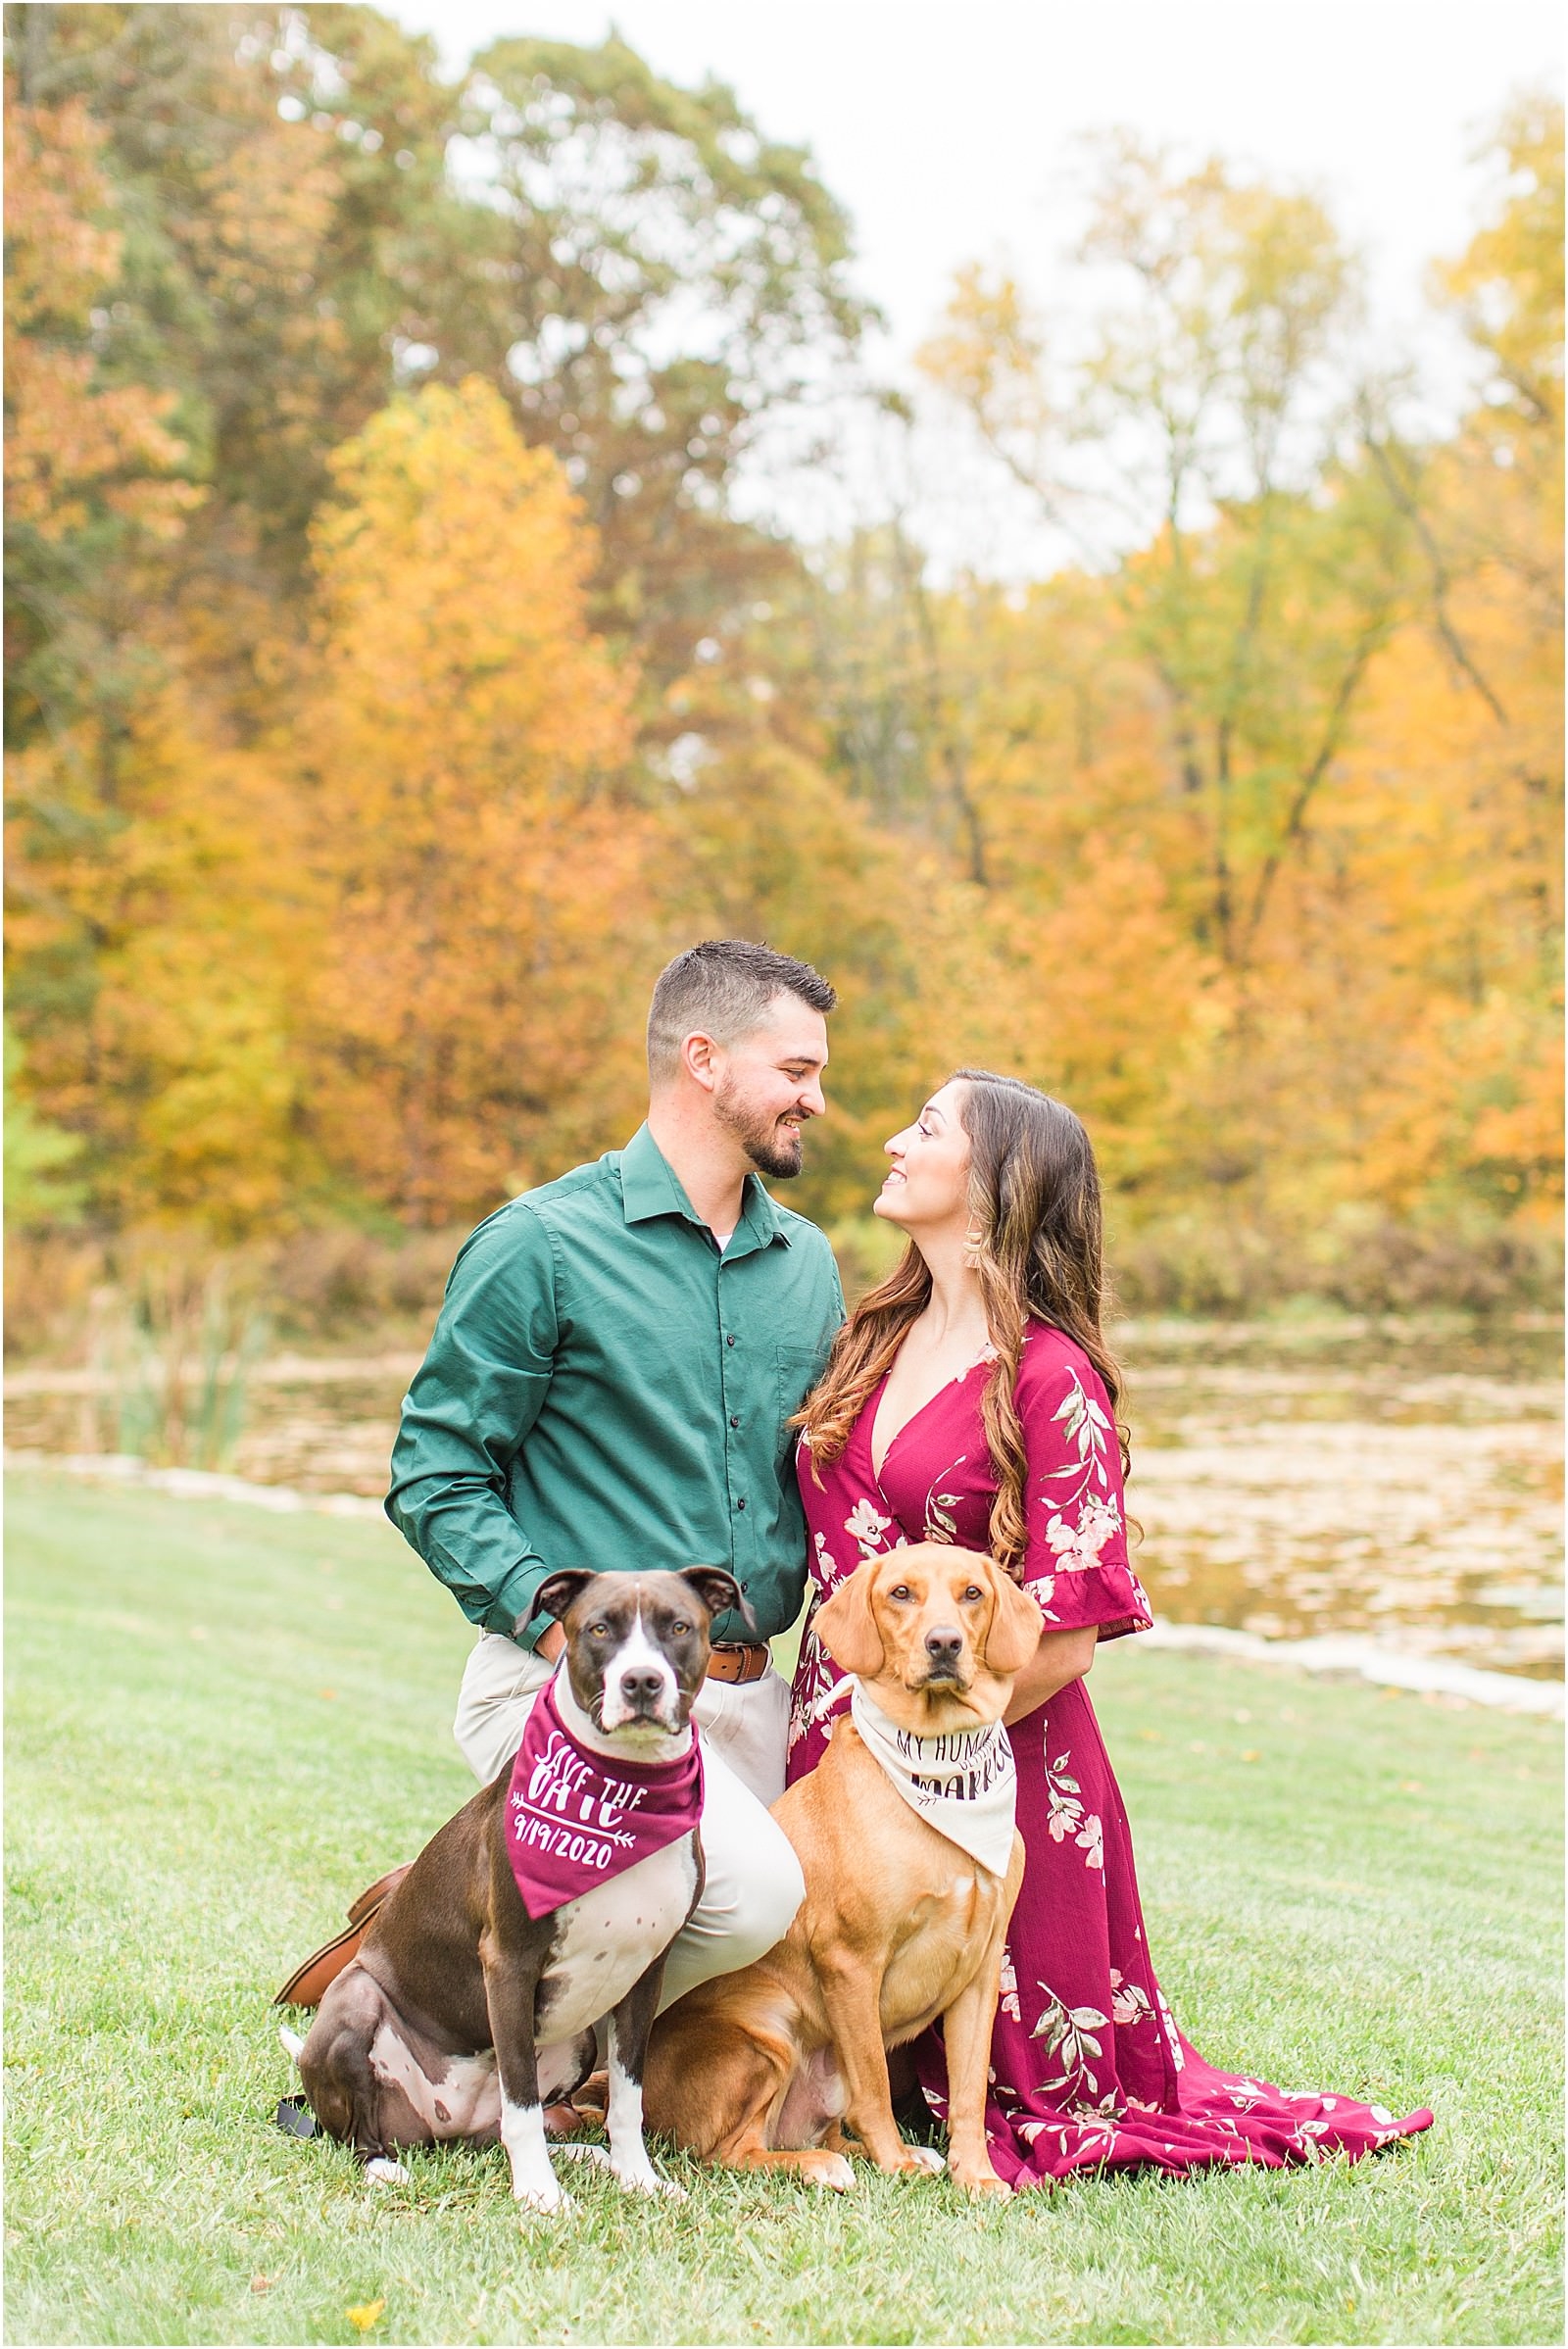 A Fall Oliver Winery Engagement Session | Sally and Andrew | Bret and Brandie Photography 0002.jpg